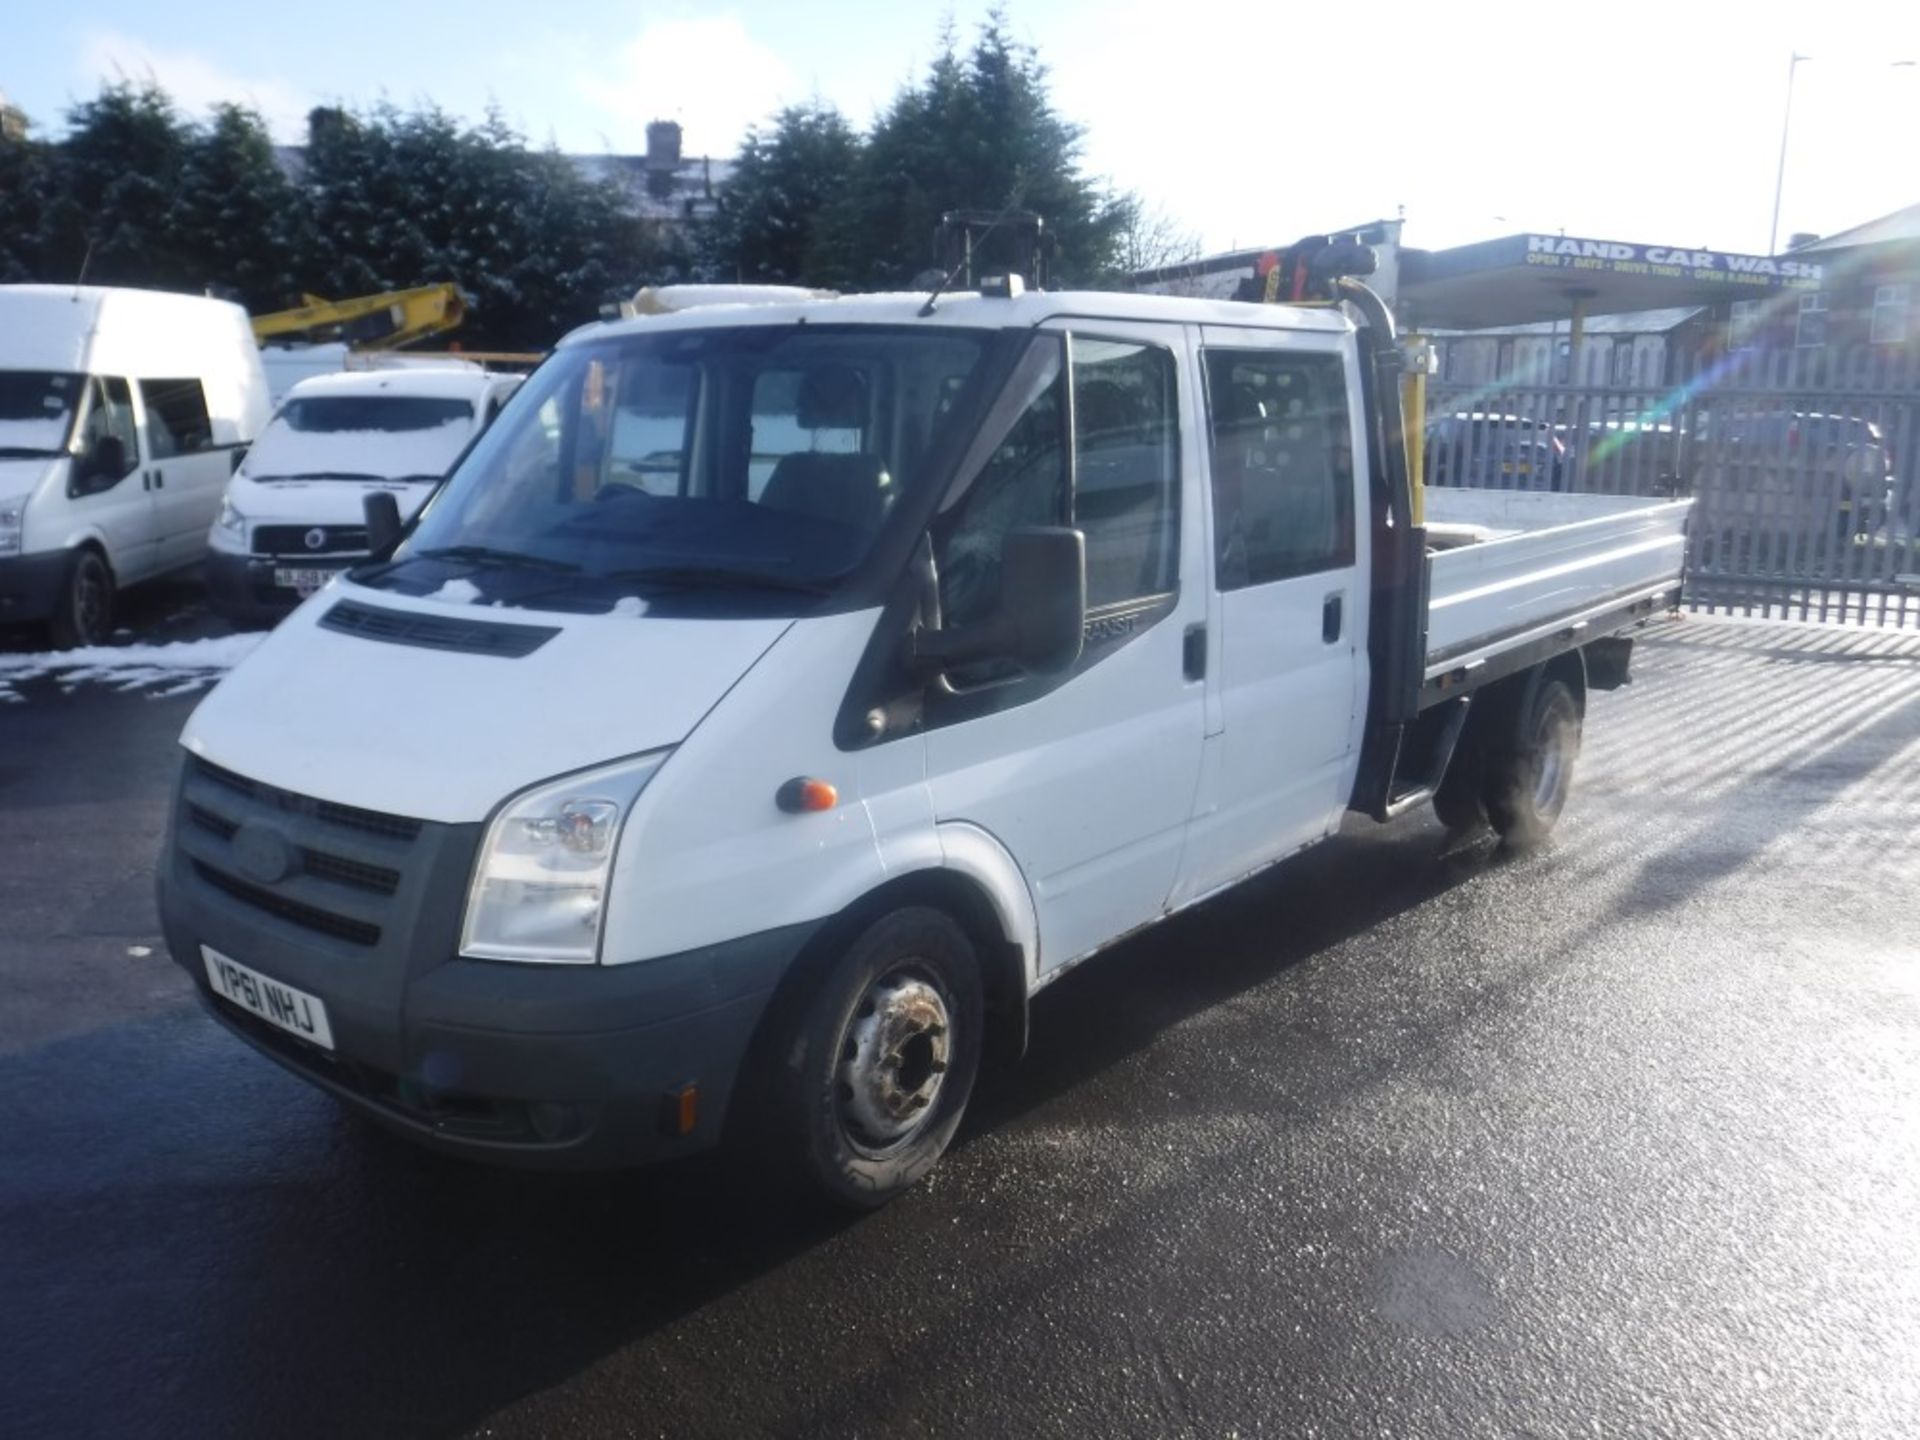 61 reg FORD TRANSIT 100 T350 D/C RWD DROPSIDE, 1ST REG 11/11, 82767M, V5 HERE, 1 OWNER FROM NEW [+ - Image 2 of 5